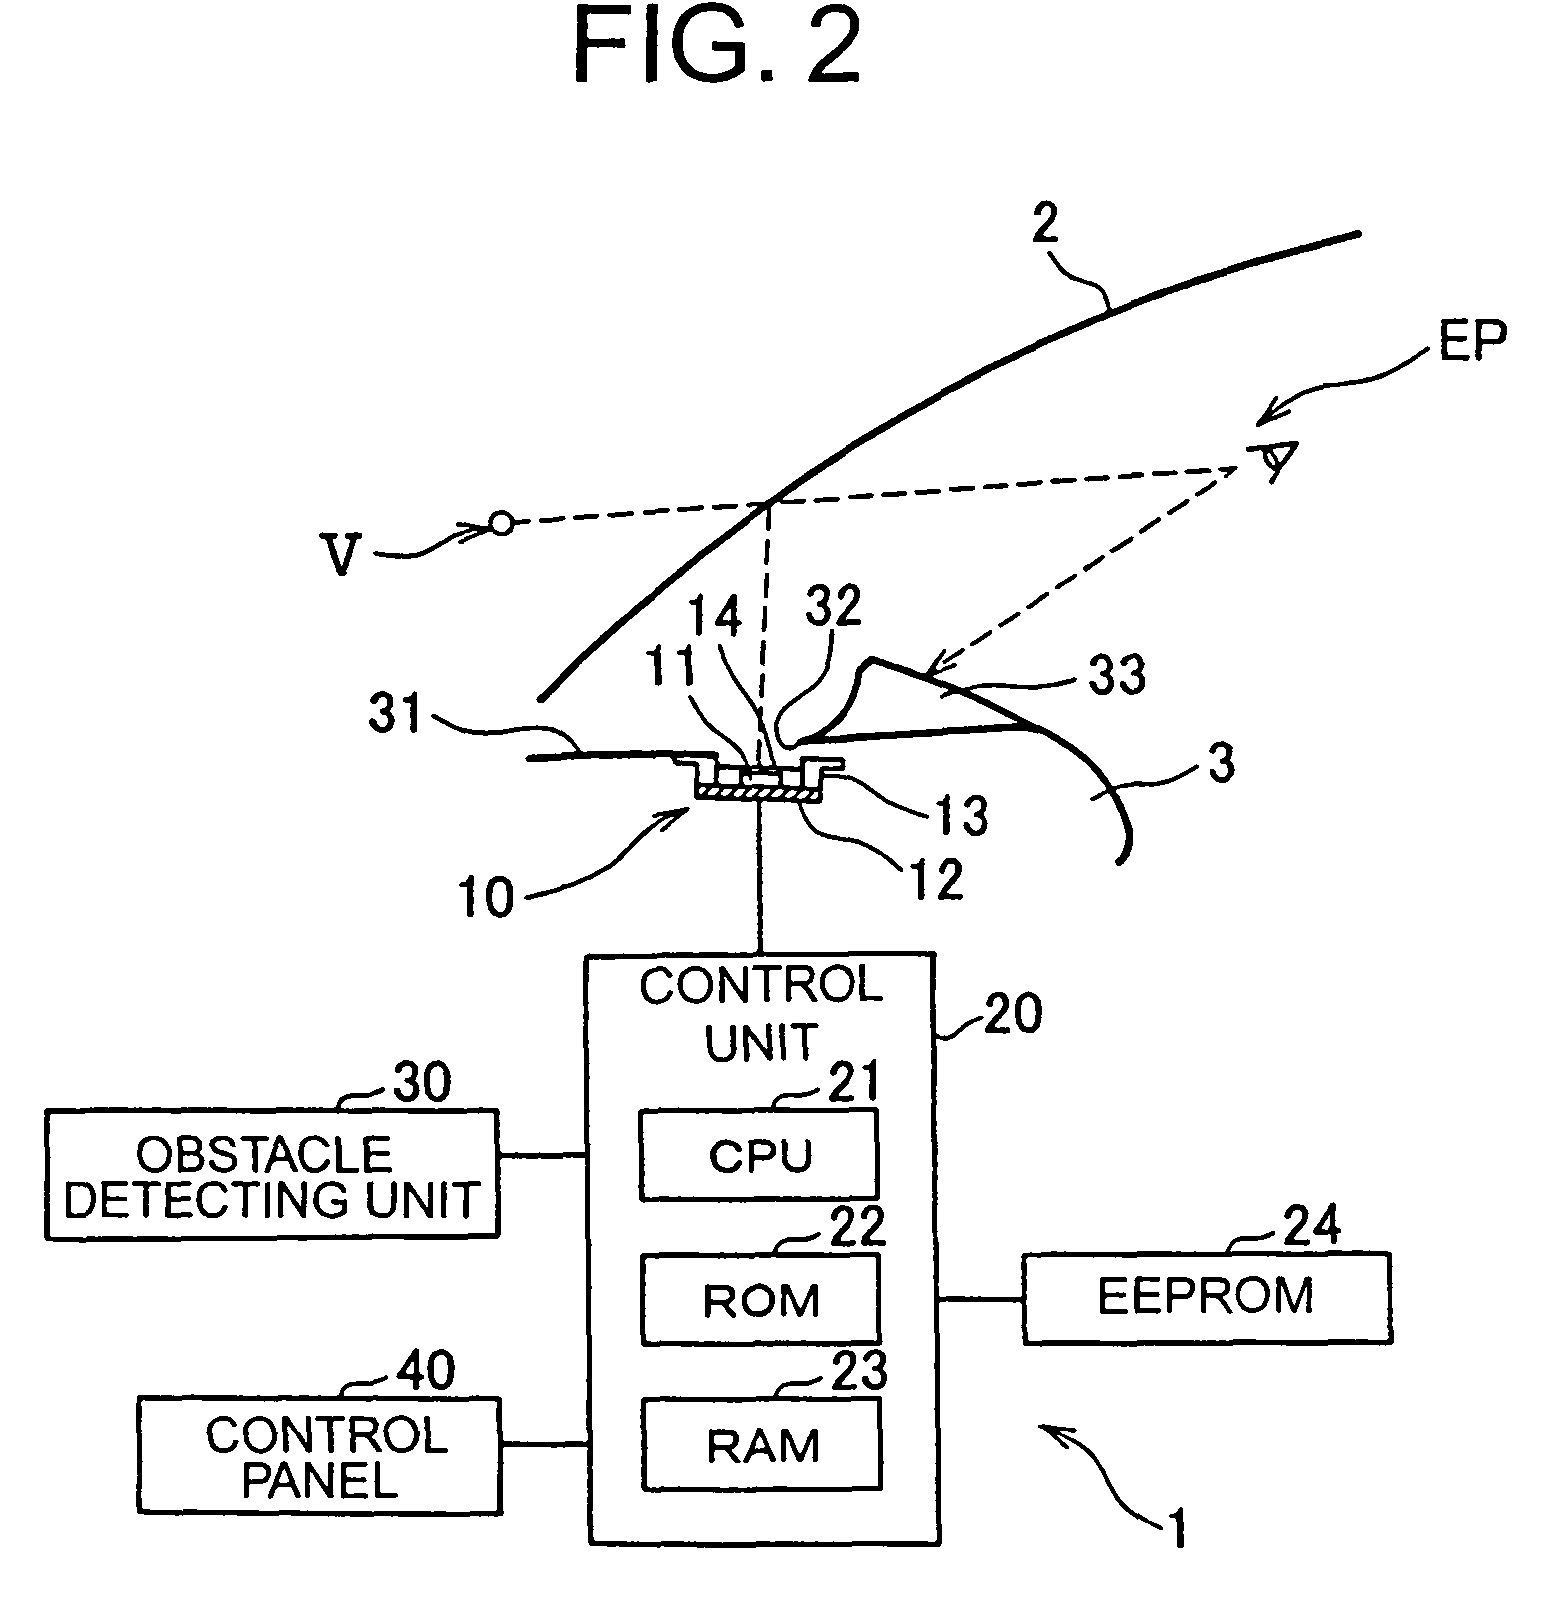 In-vehicle display device